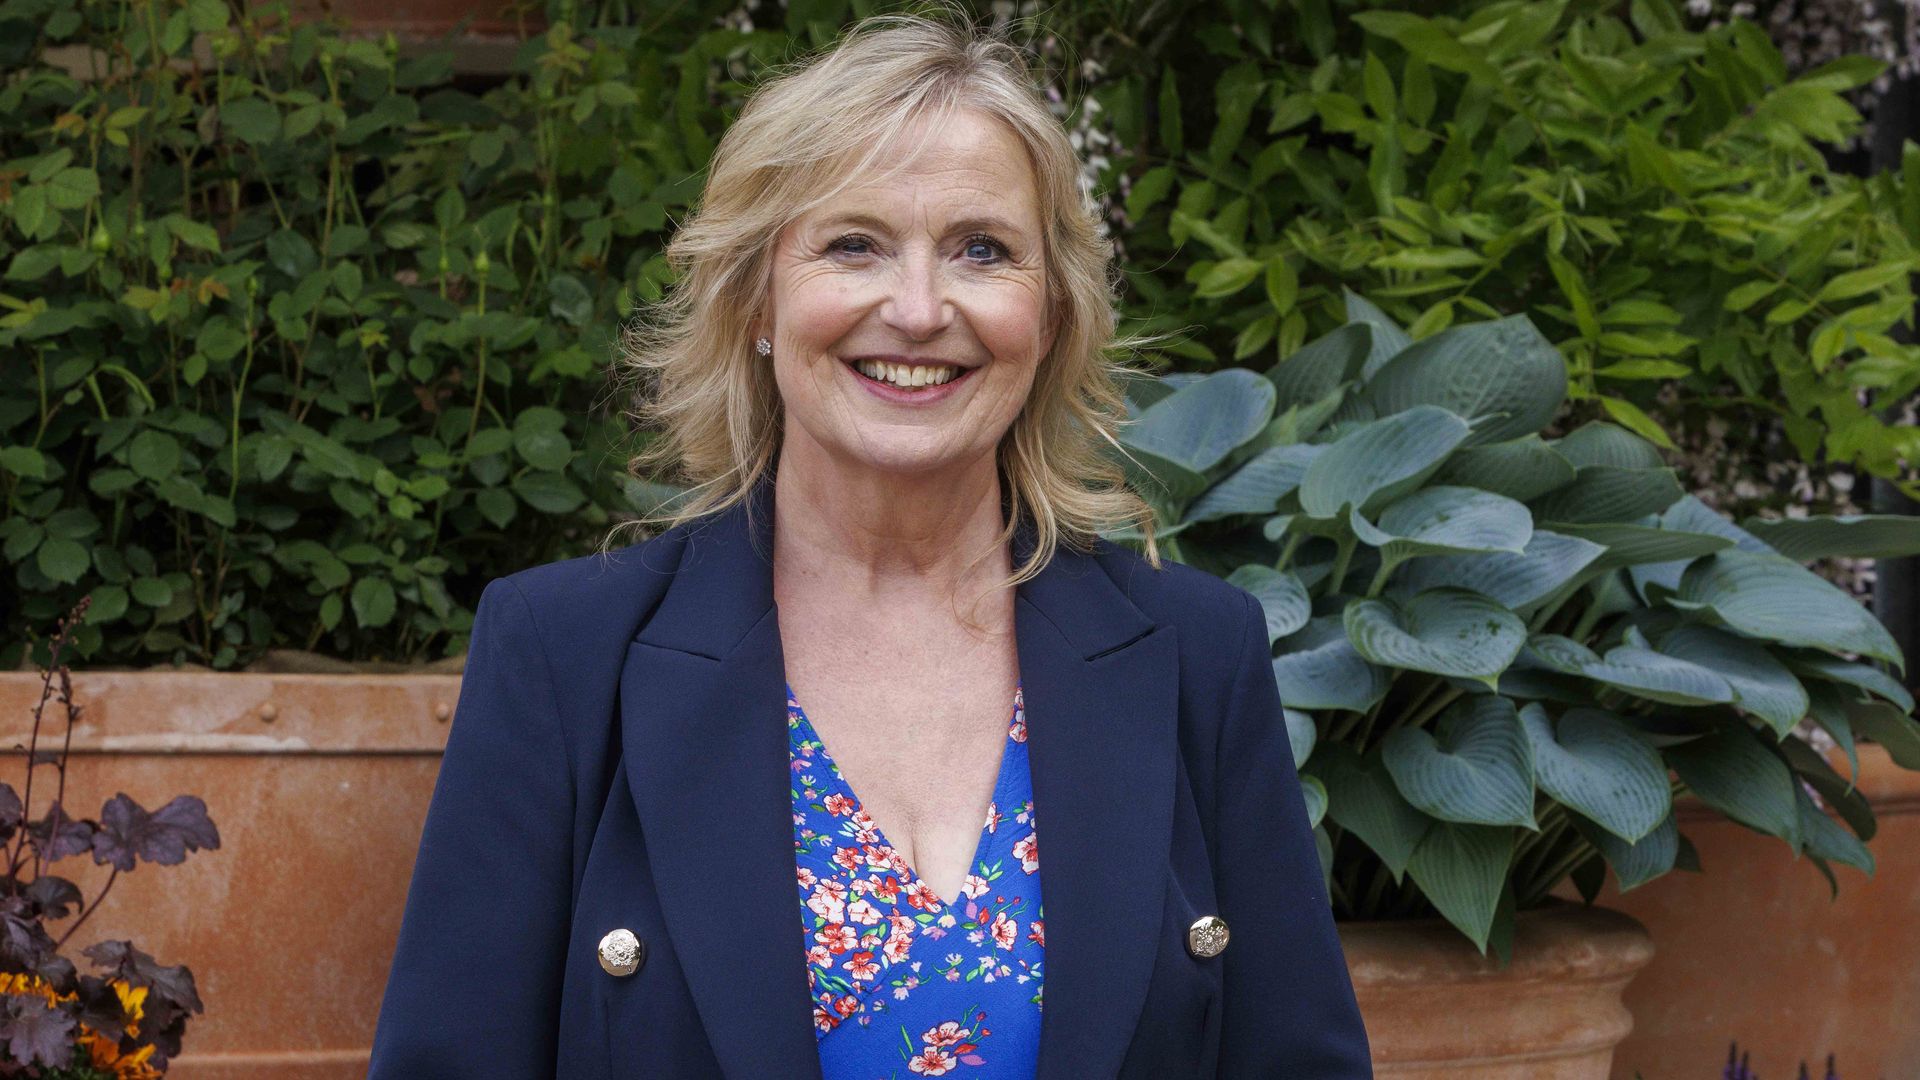 Carol Kirkwood at Chelsea Flower Show Press Day on 23 May 2022